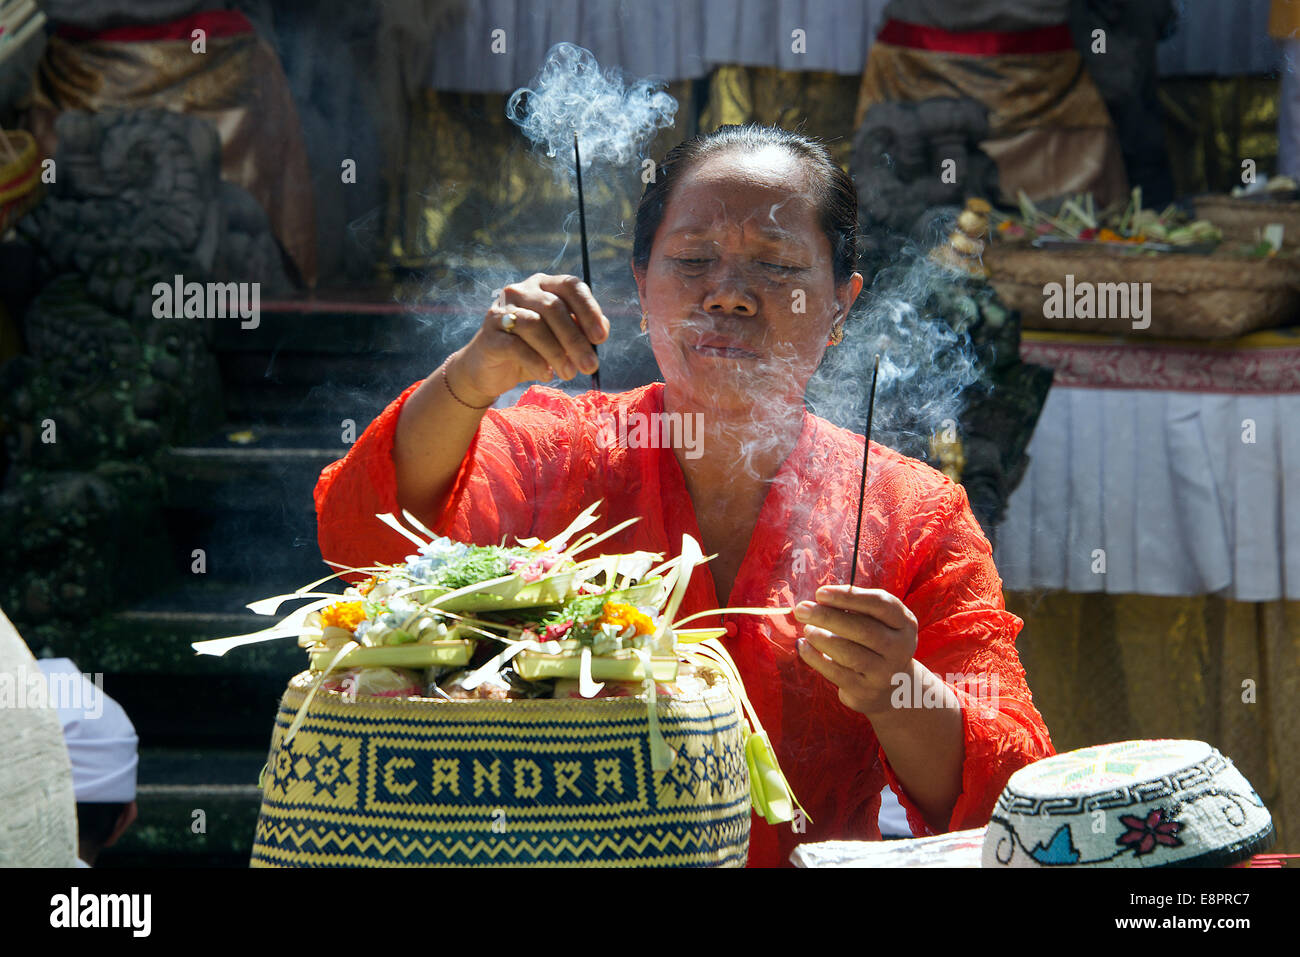 Balinese woman preparing offerings in temple for ceremony Ubud Bali Indonesia Stock Photo